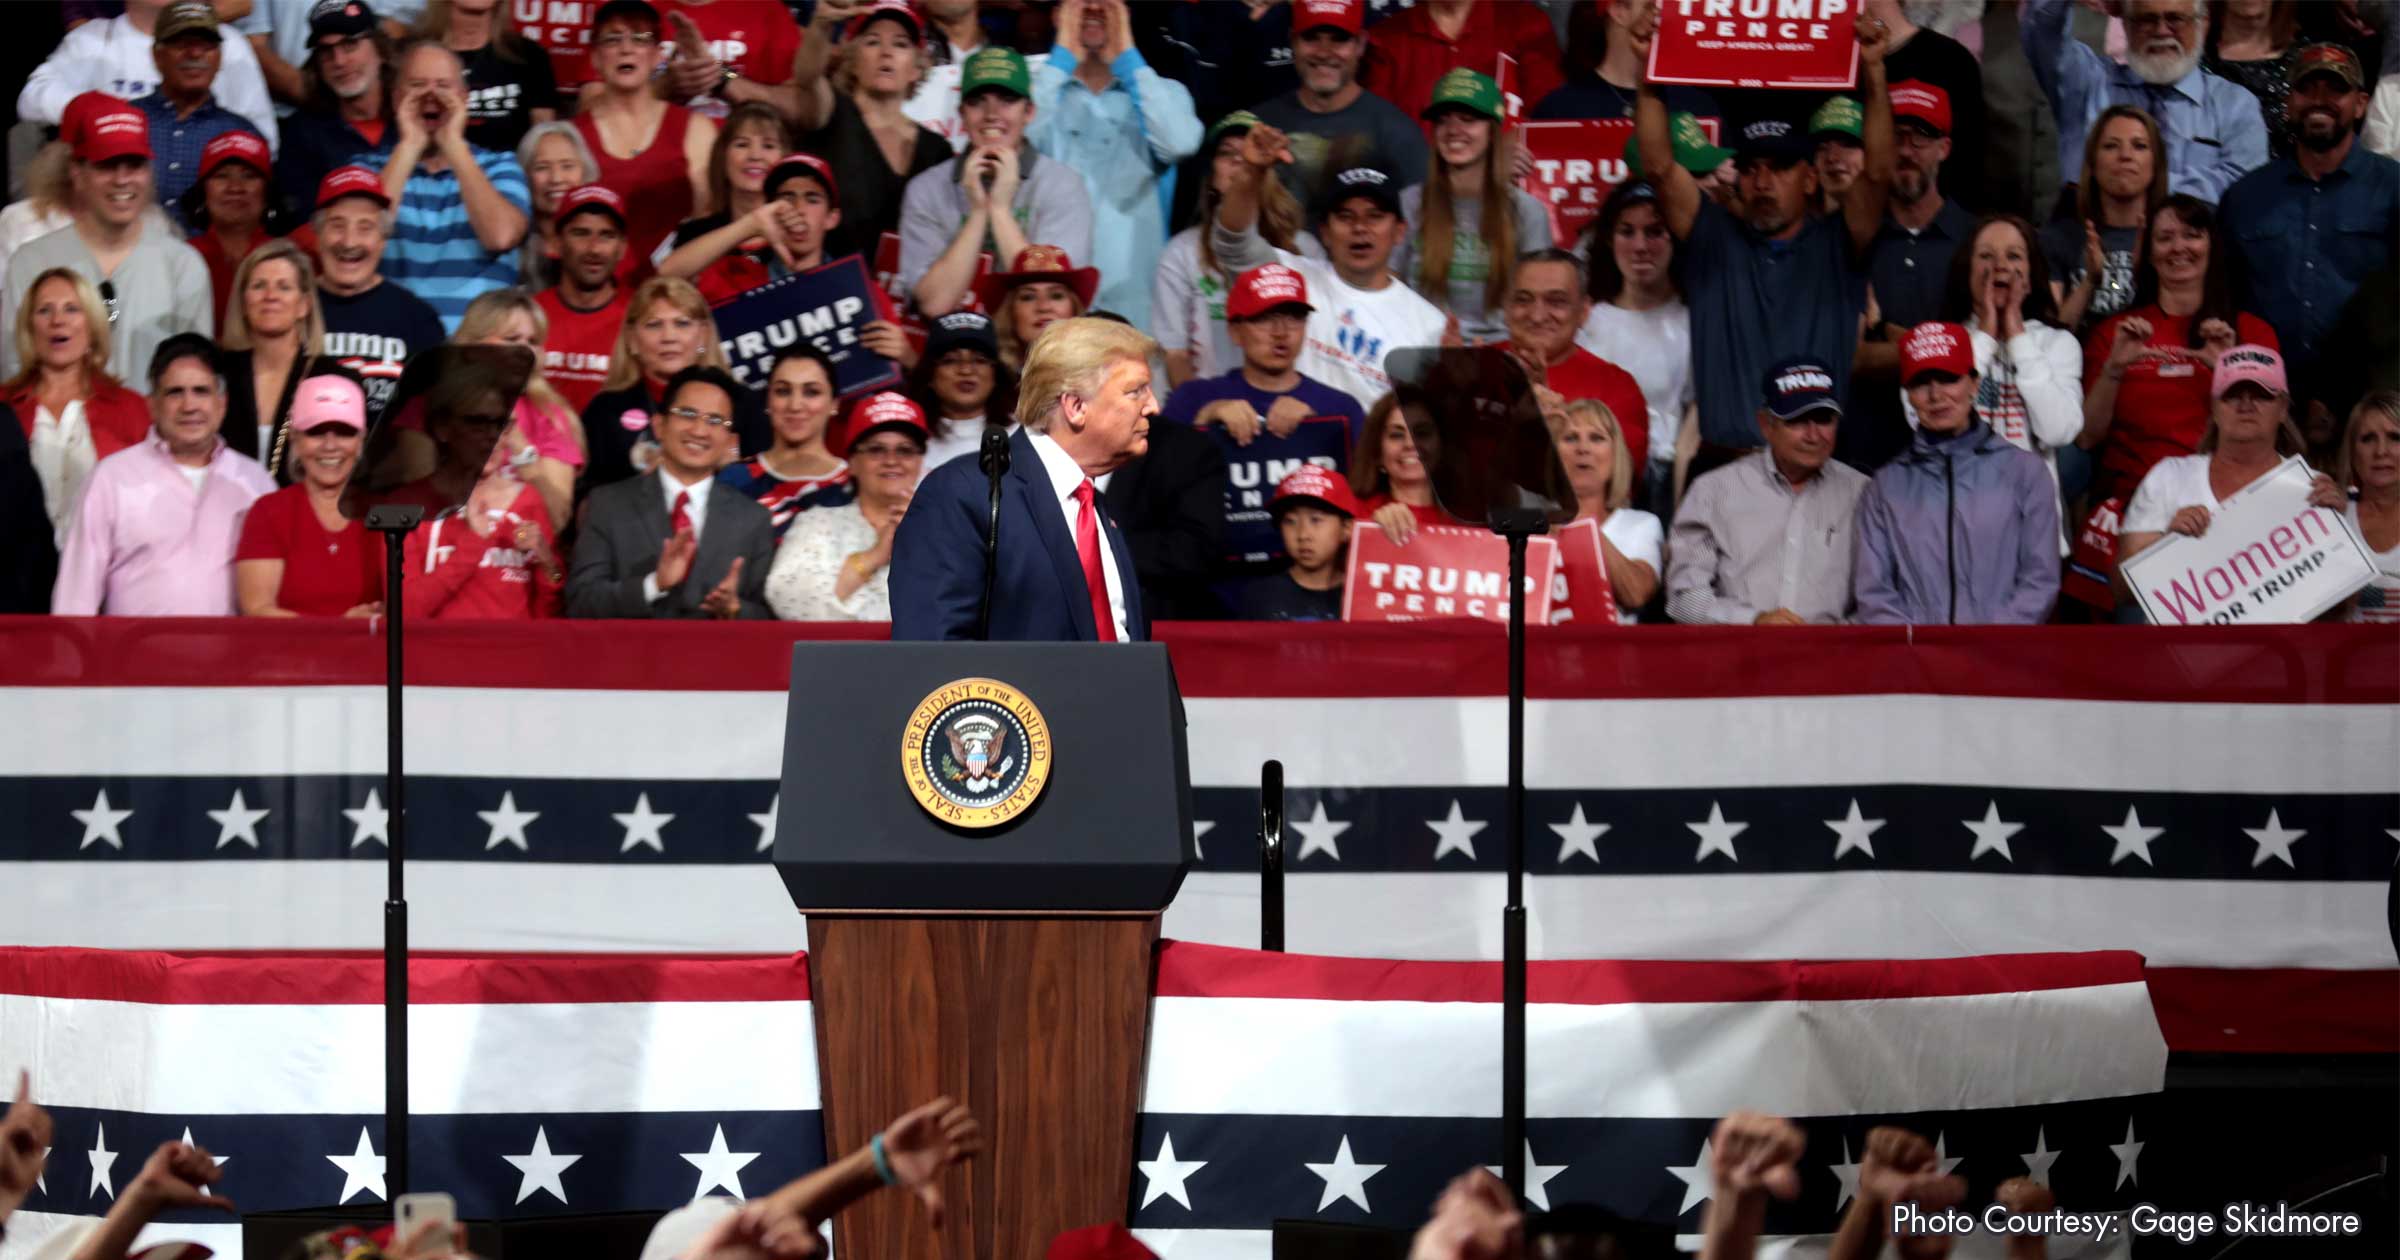 Legal Votes Only Trump Election 2020 Rally Crowd HEADER